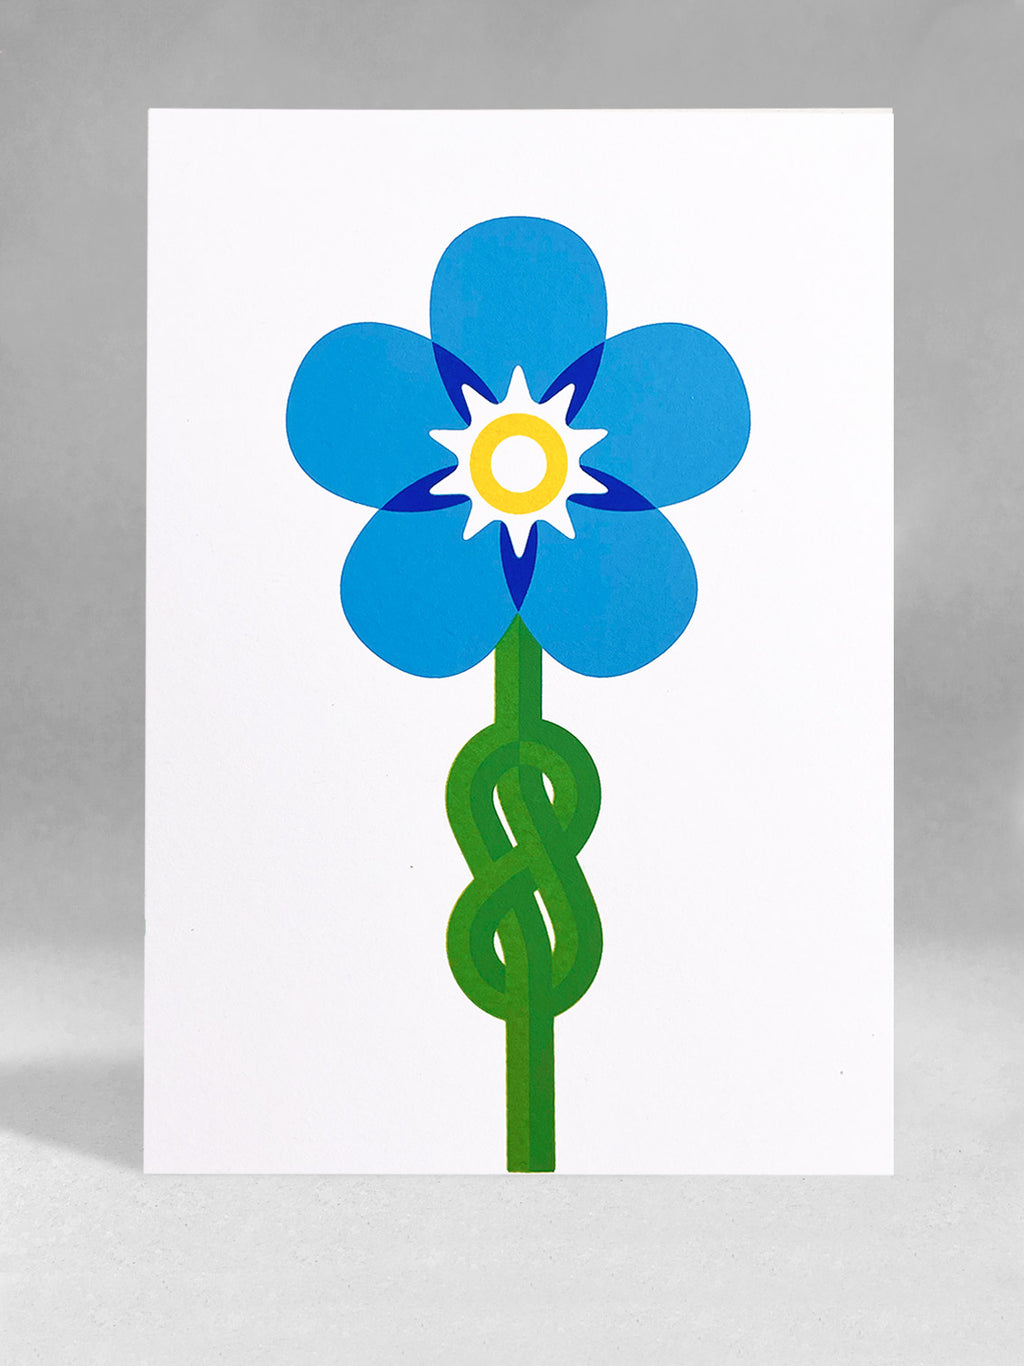 A forget me knot image using 5 colours blues, yellow and green screenprinted onto a white portrait card, stood in a light grey studio backdrop.